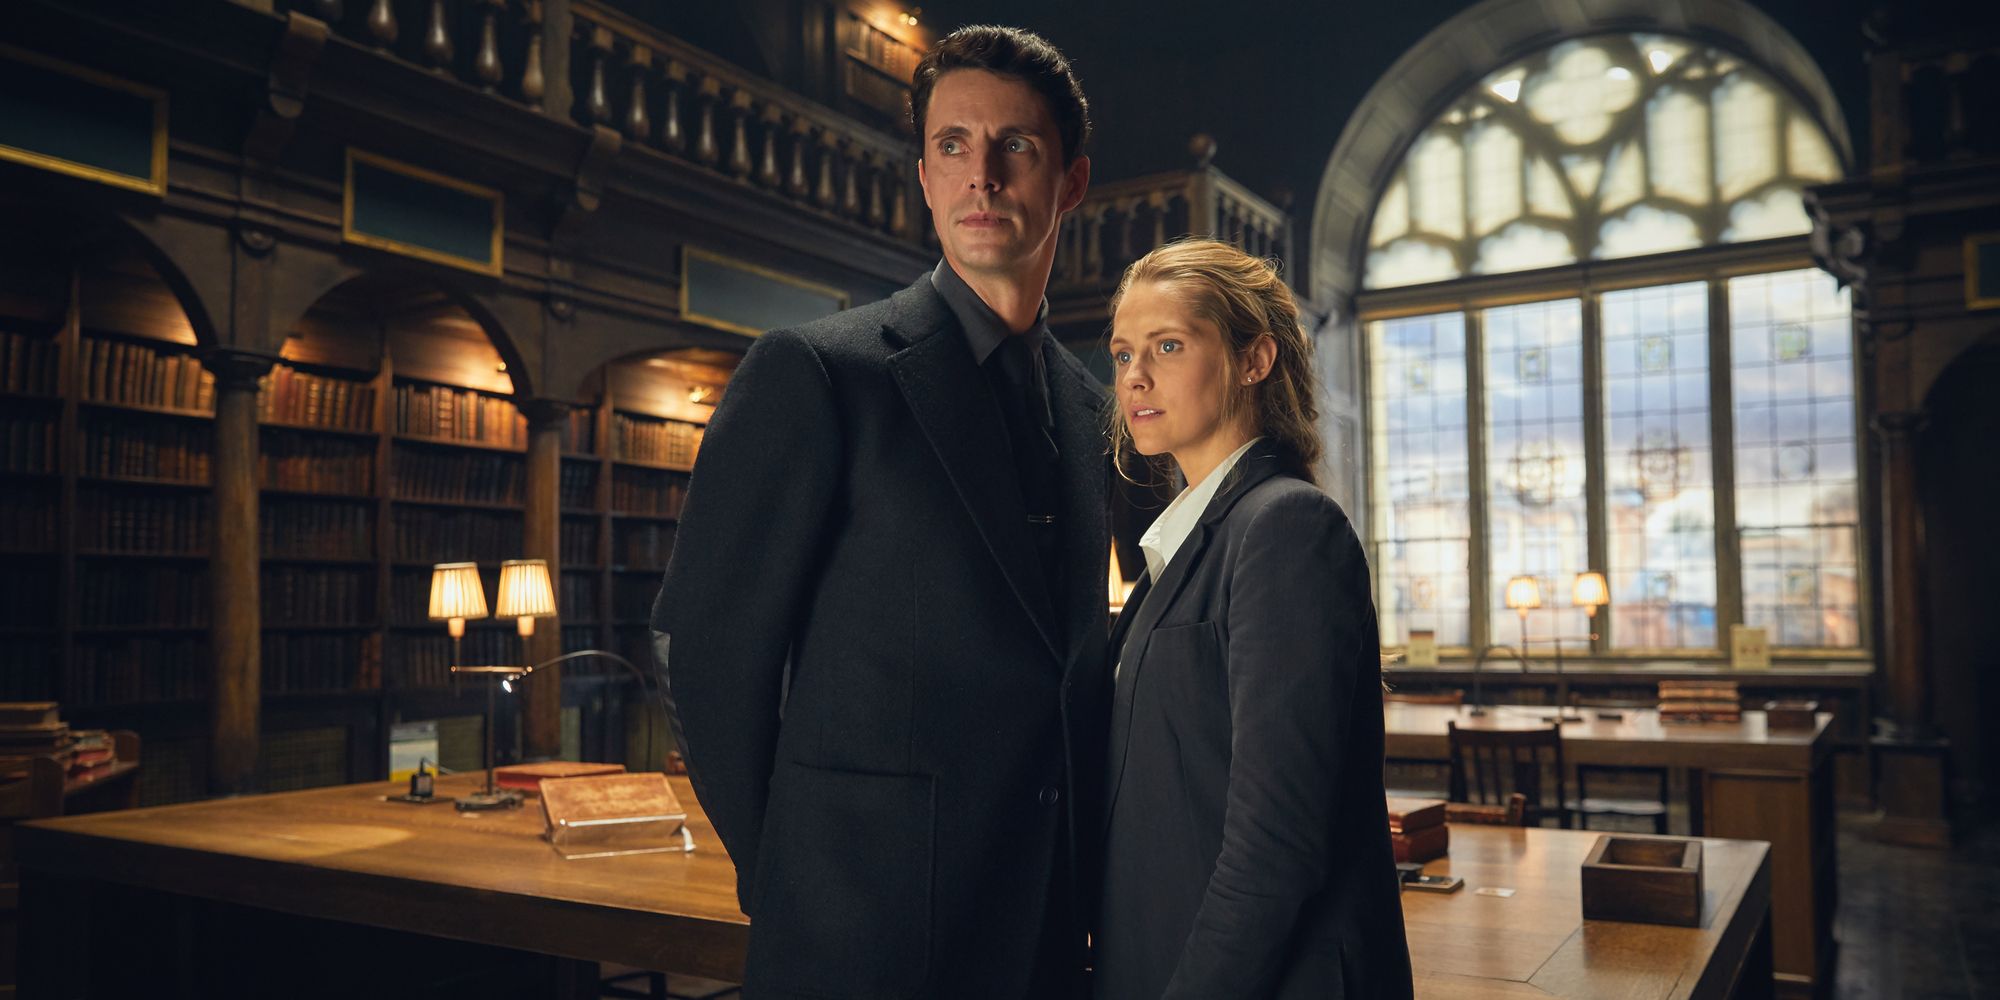 Matthew Goode and Teresa Palmers in A Discovery of Witches